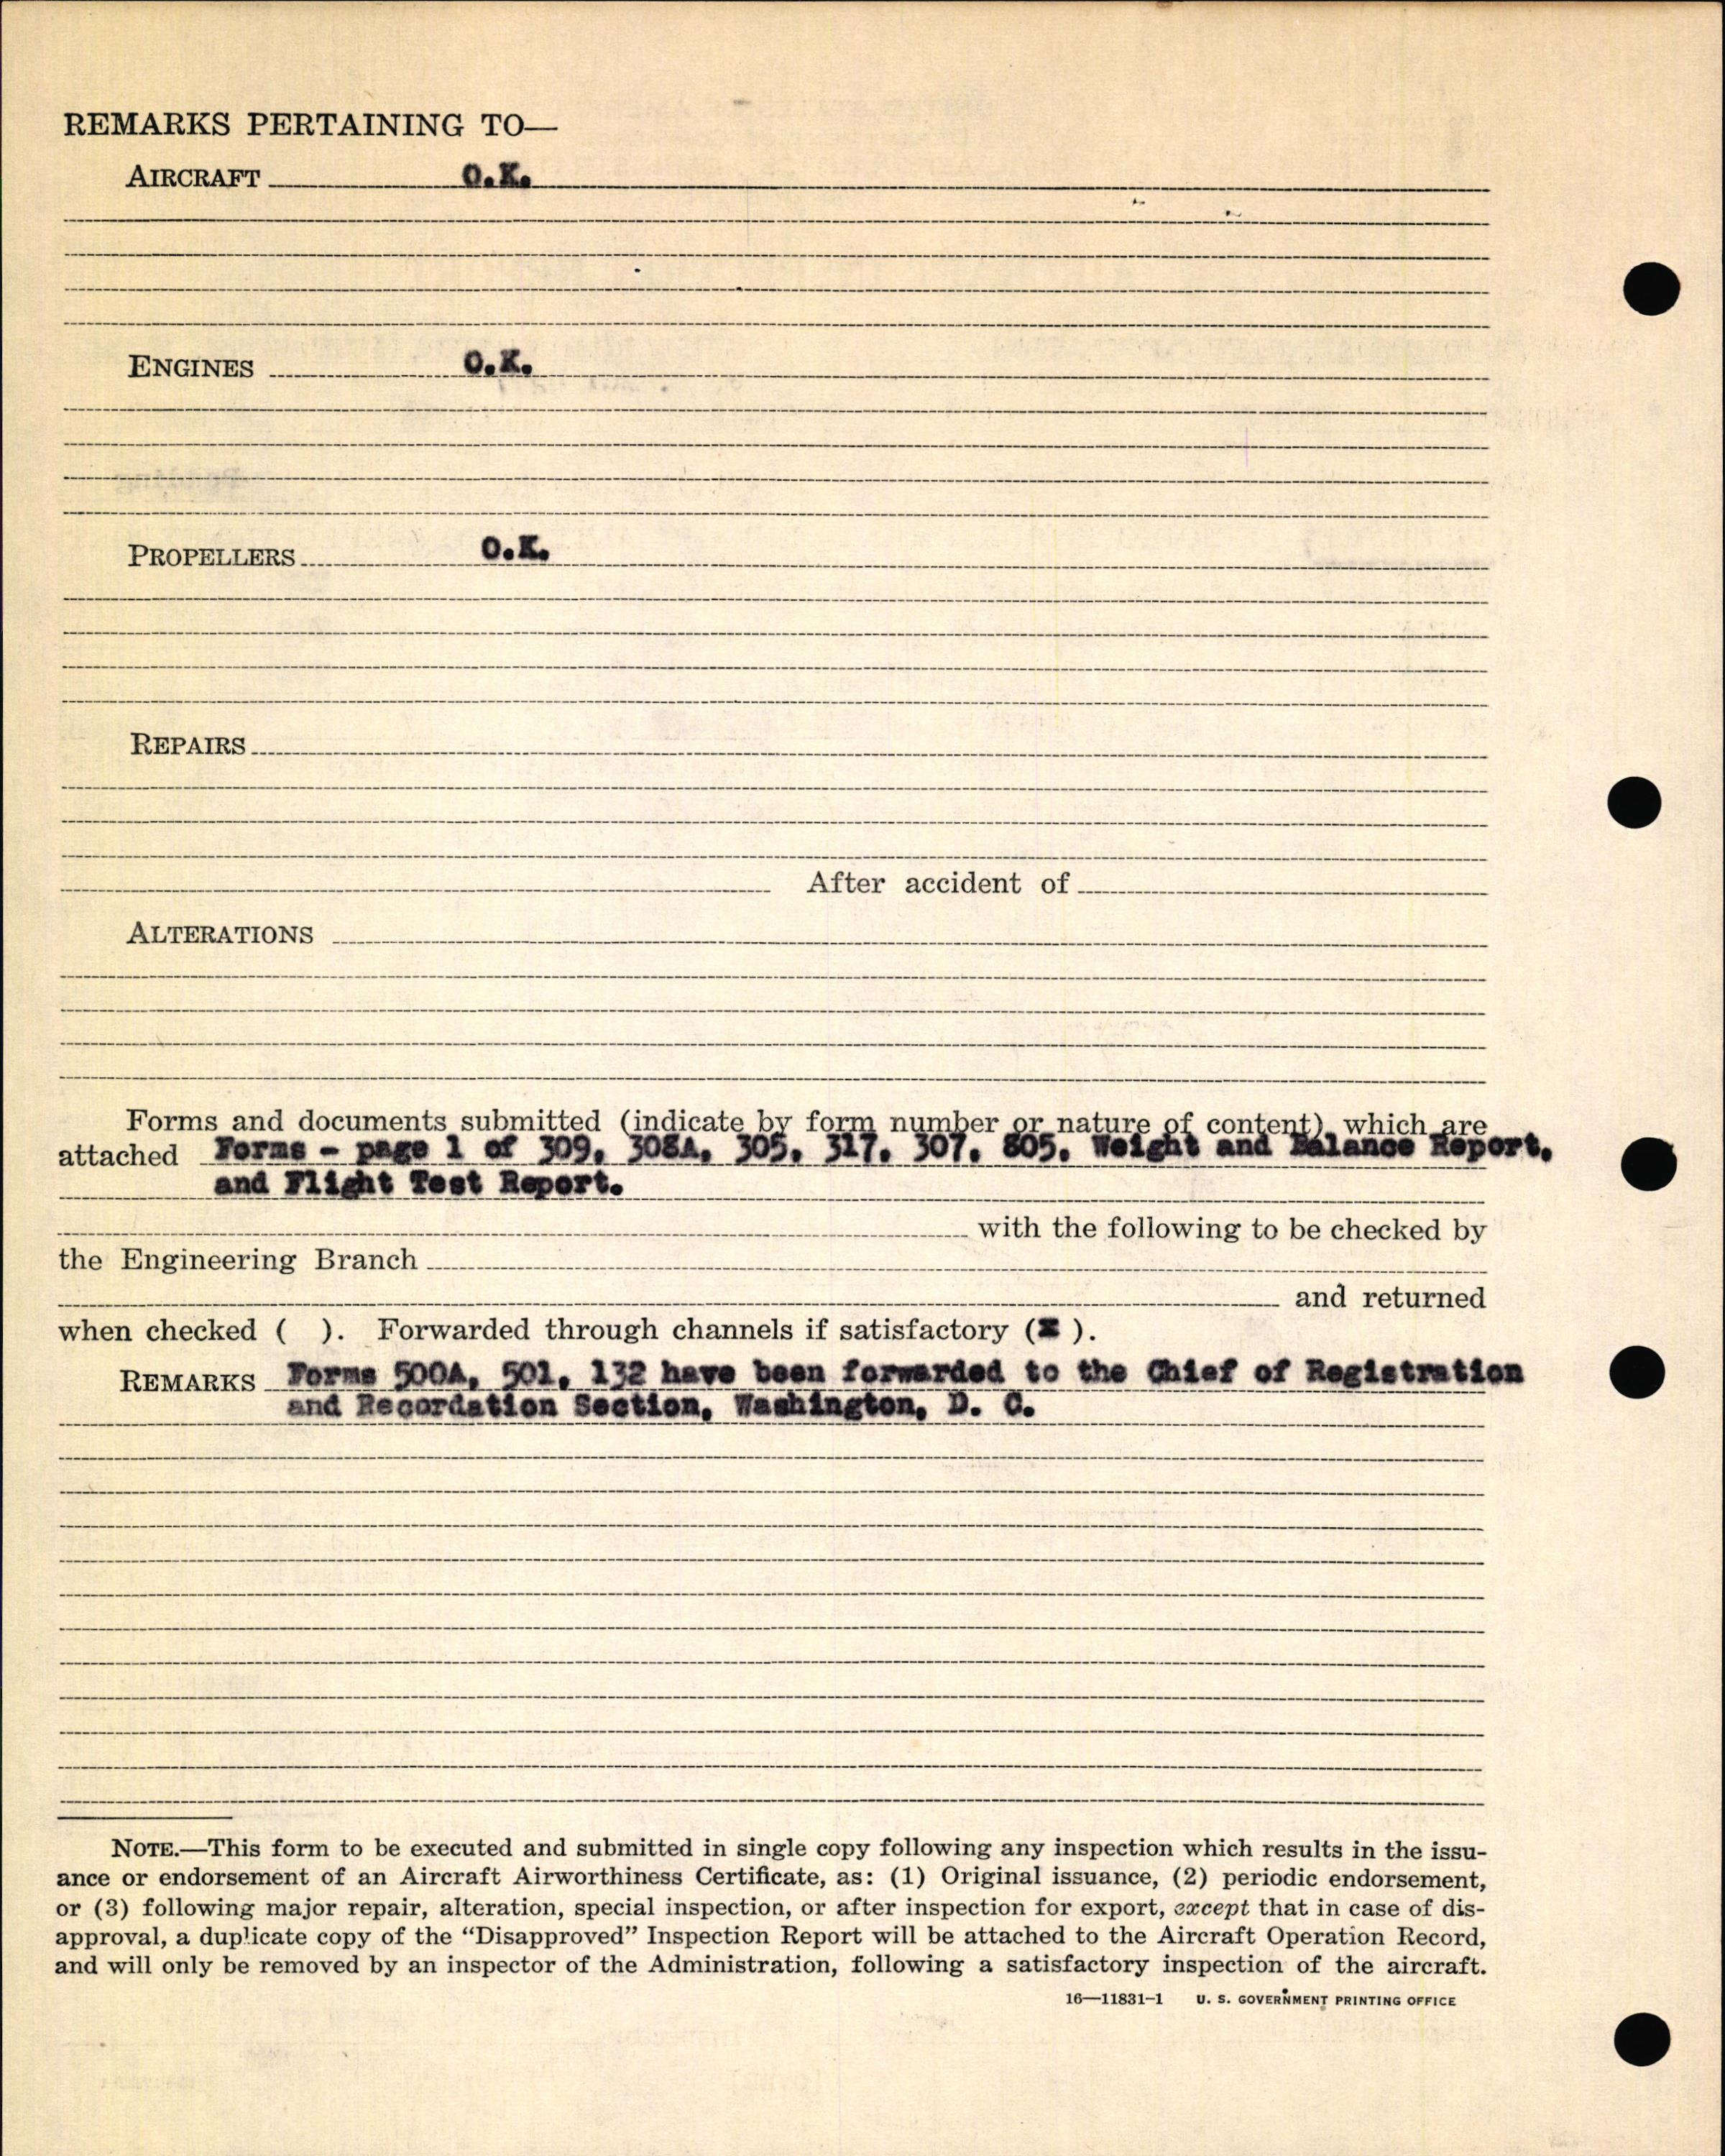 Sample page 6 from AirCorps Library document: Technical Information for Serial Number 65